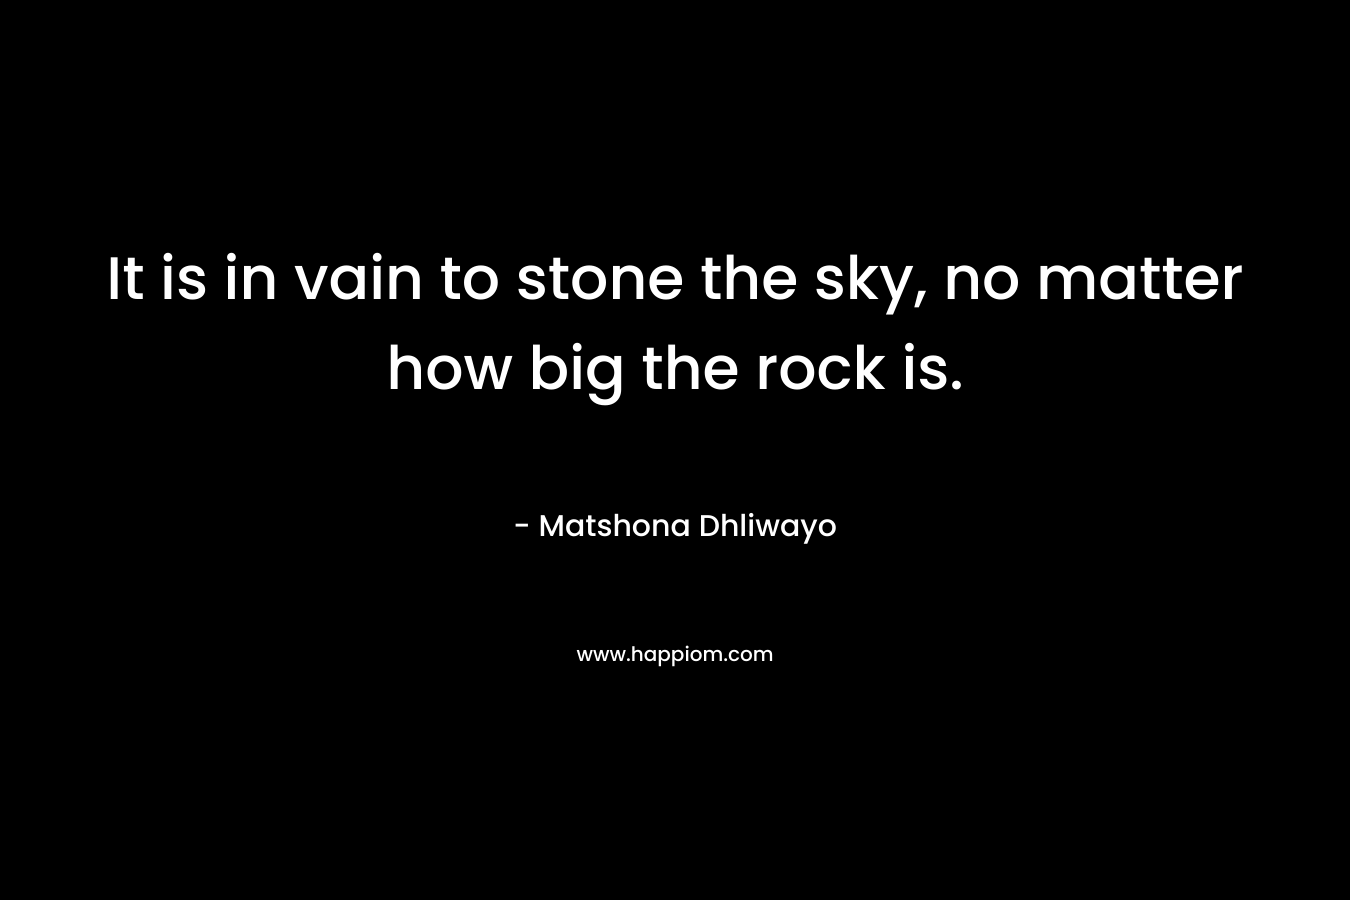 It is in vain to stone the sky, no matter how big the rock is.